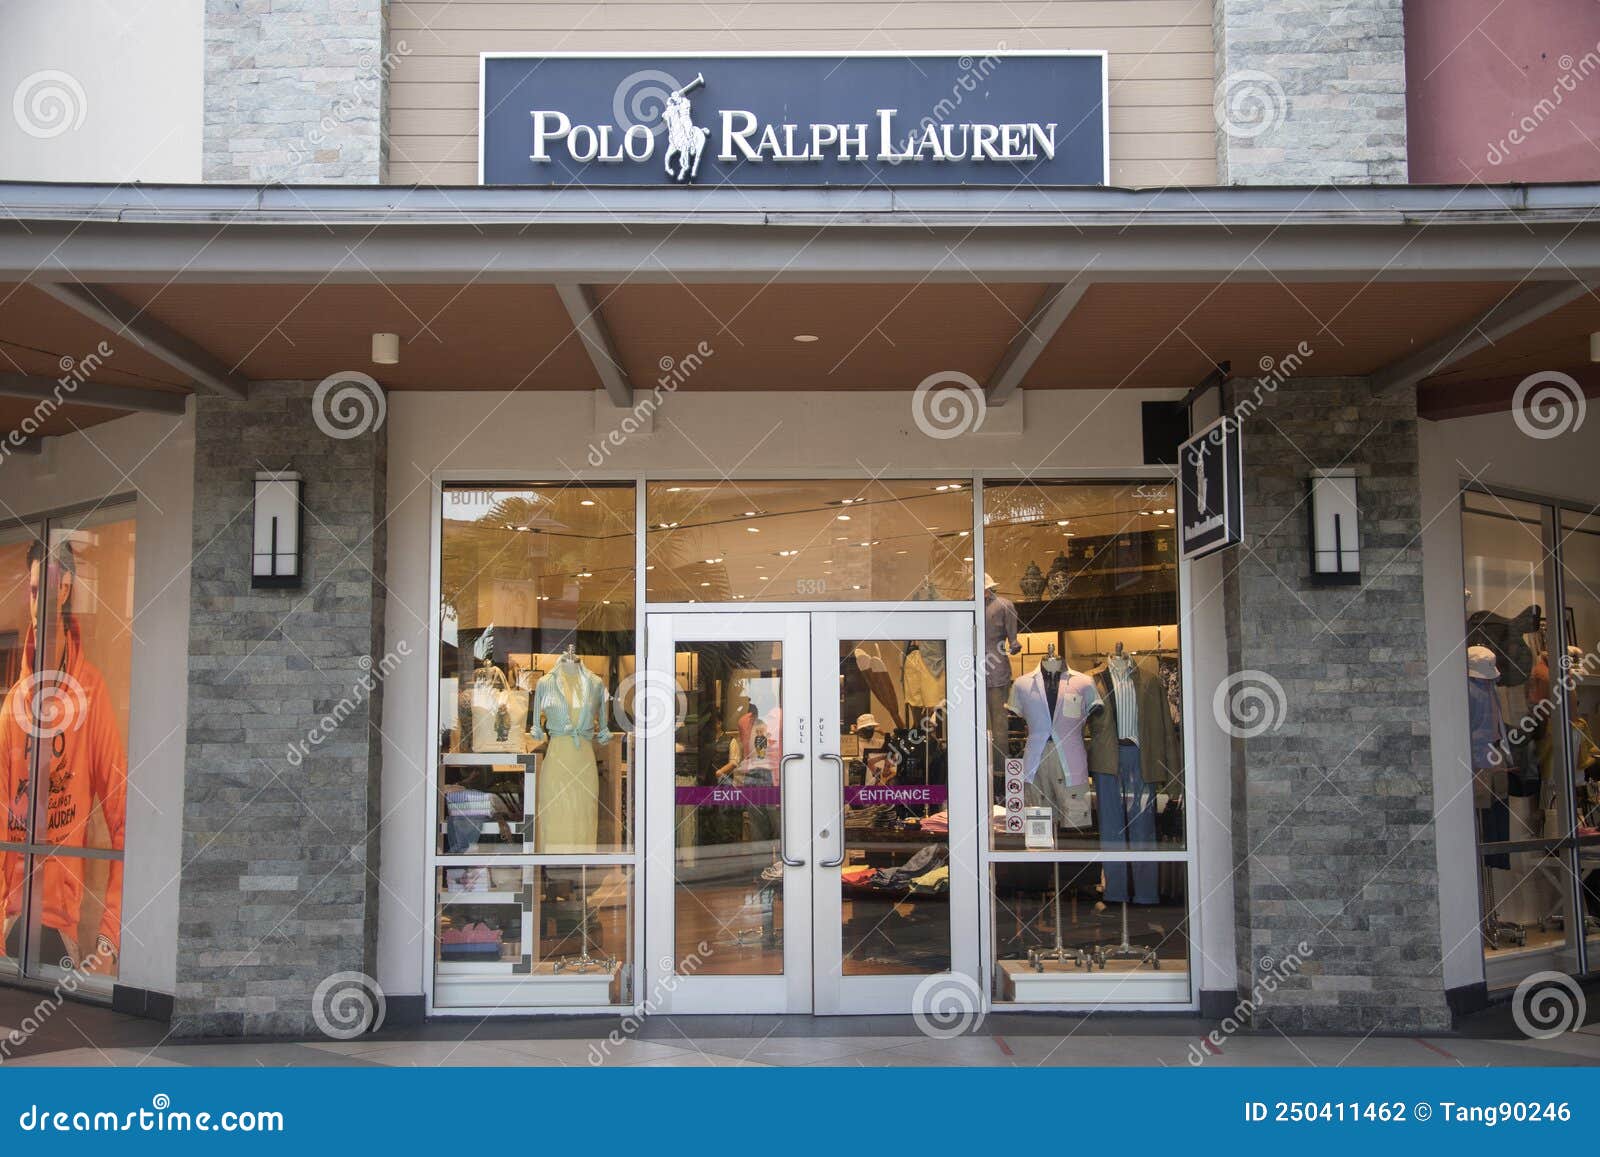 Polo Ralph Lauren Store and Sign in Genting Highland Premium Outlet,  Malaysia Editorial Photography - Image of illustrative, clothing: 250411462